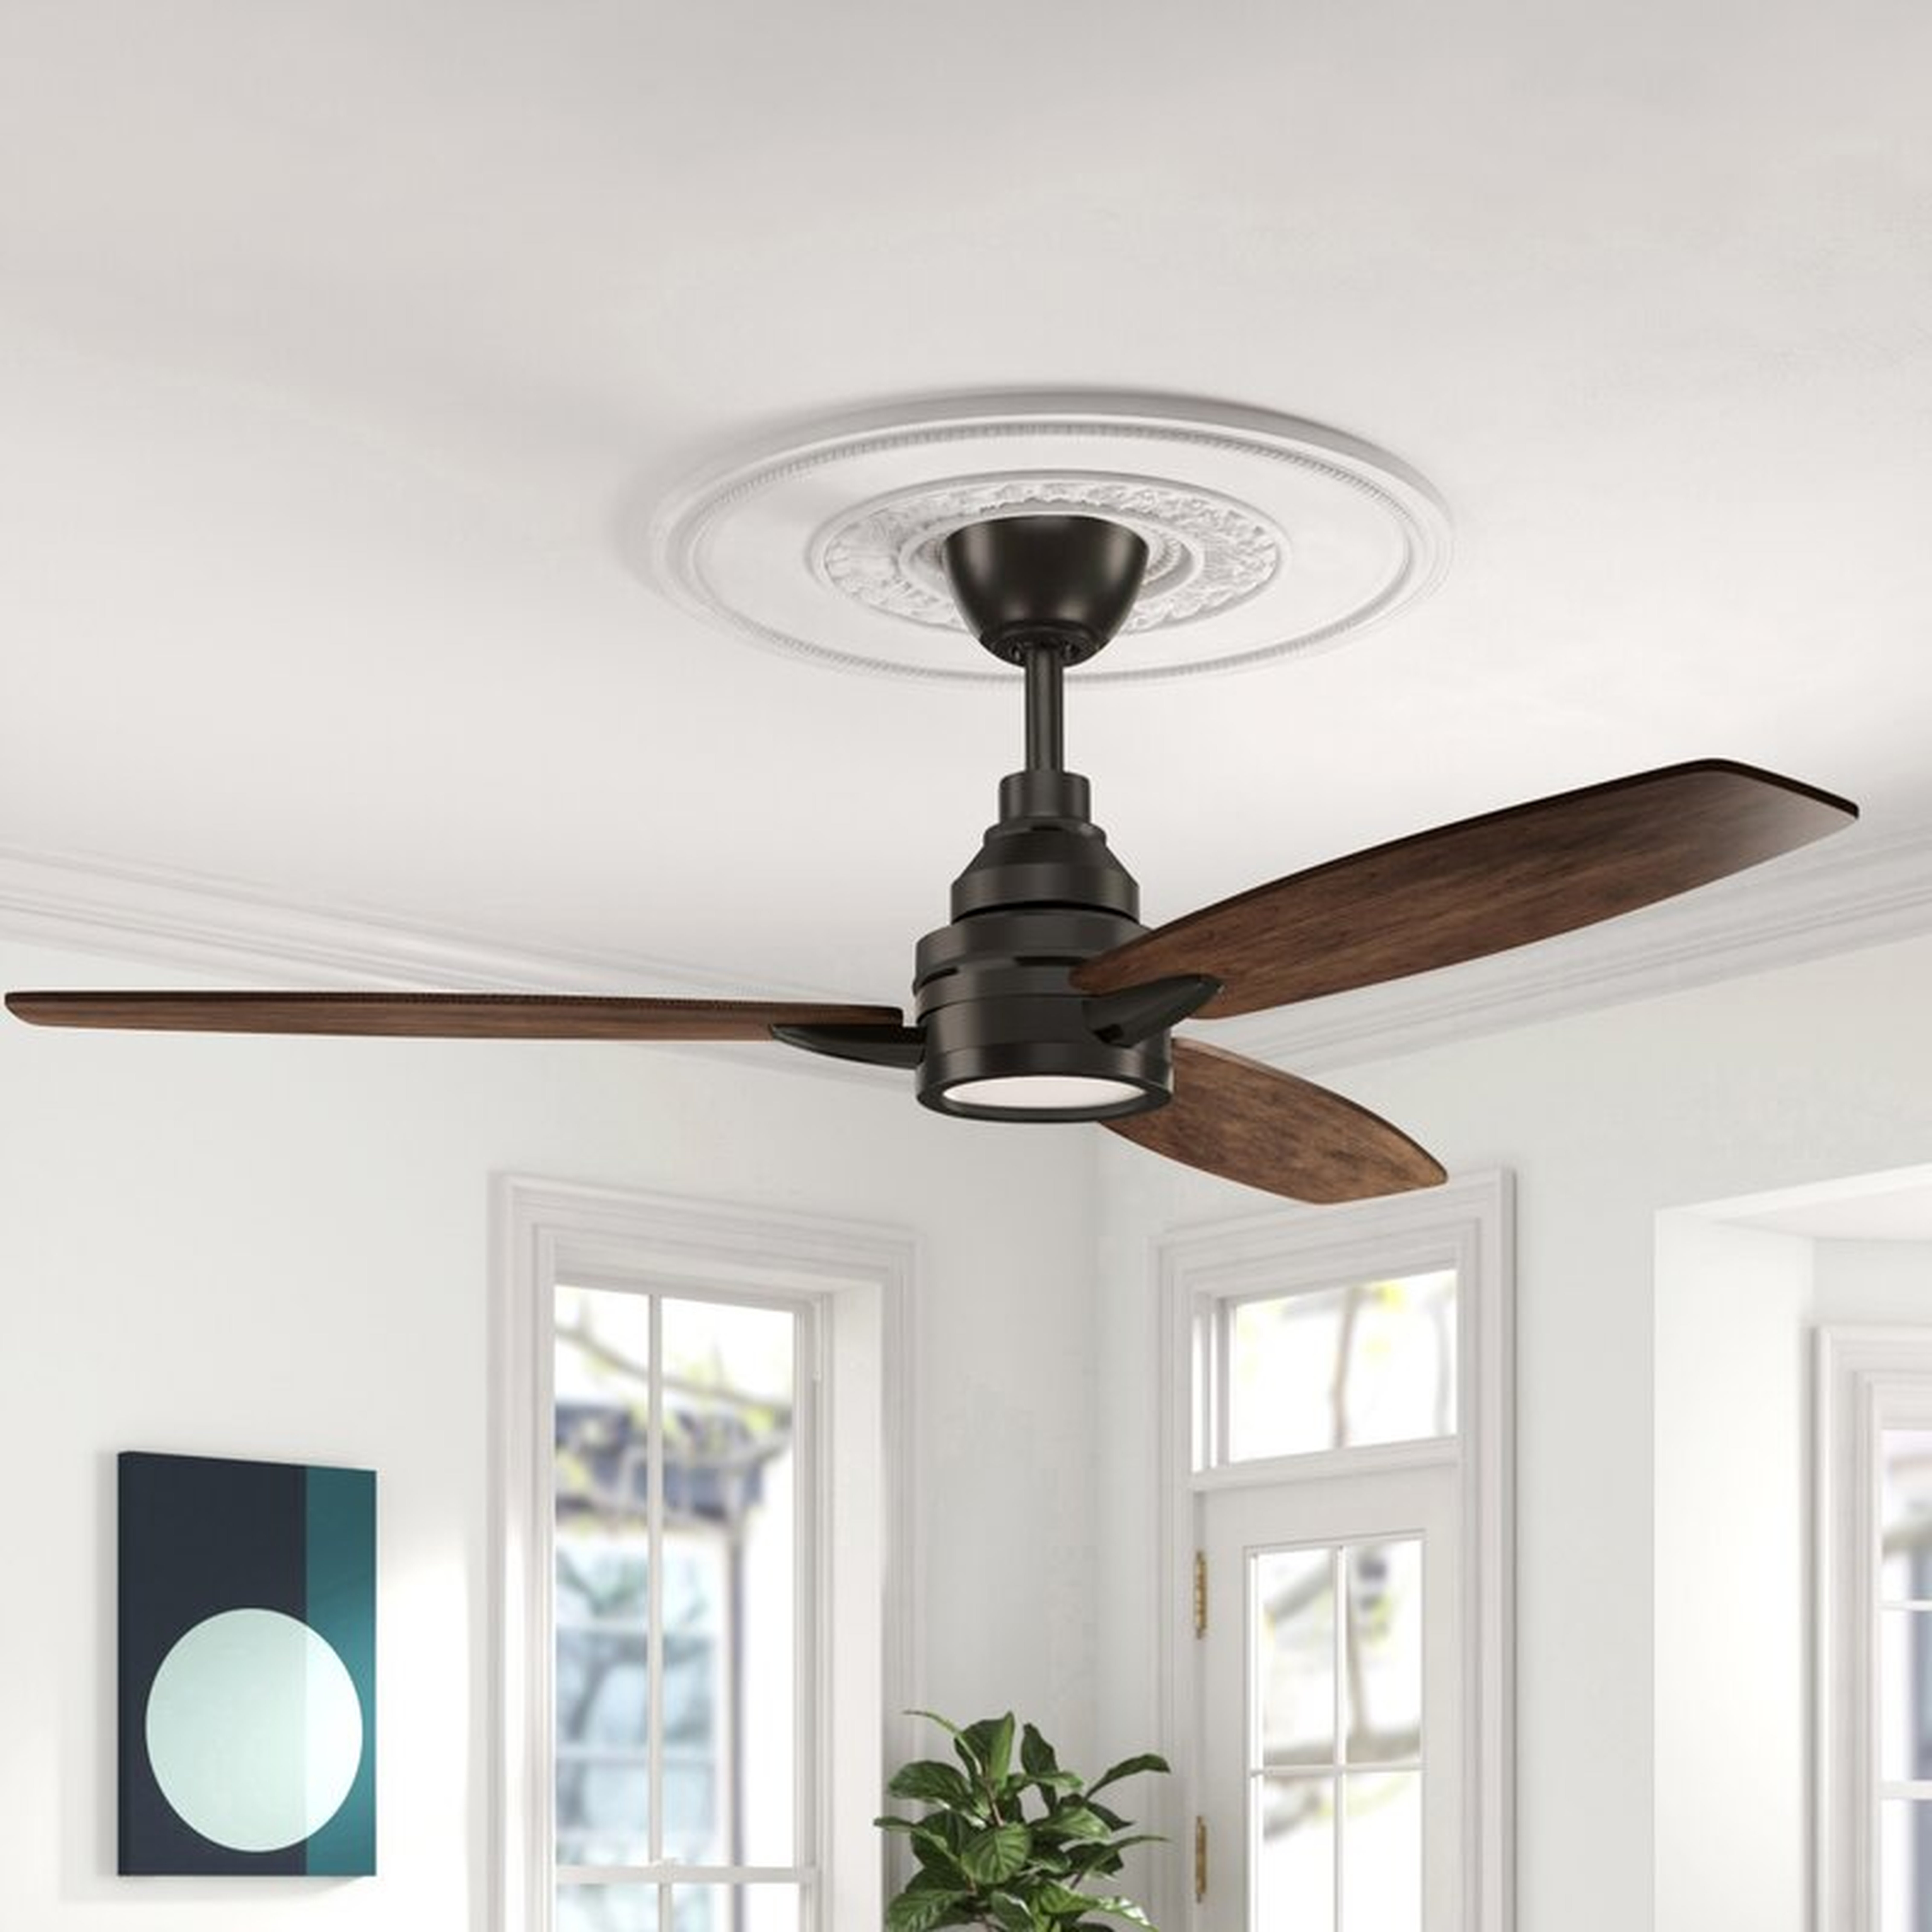 60'' 3-Blade LED Standard Ceiling Fan with Remote Control and Light Kit Included - Birch Lane